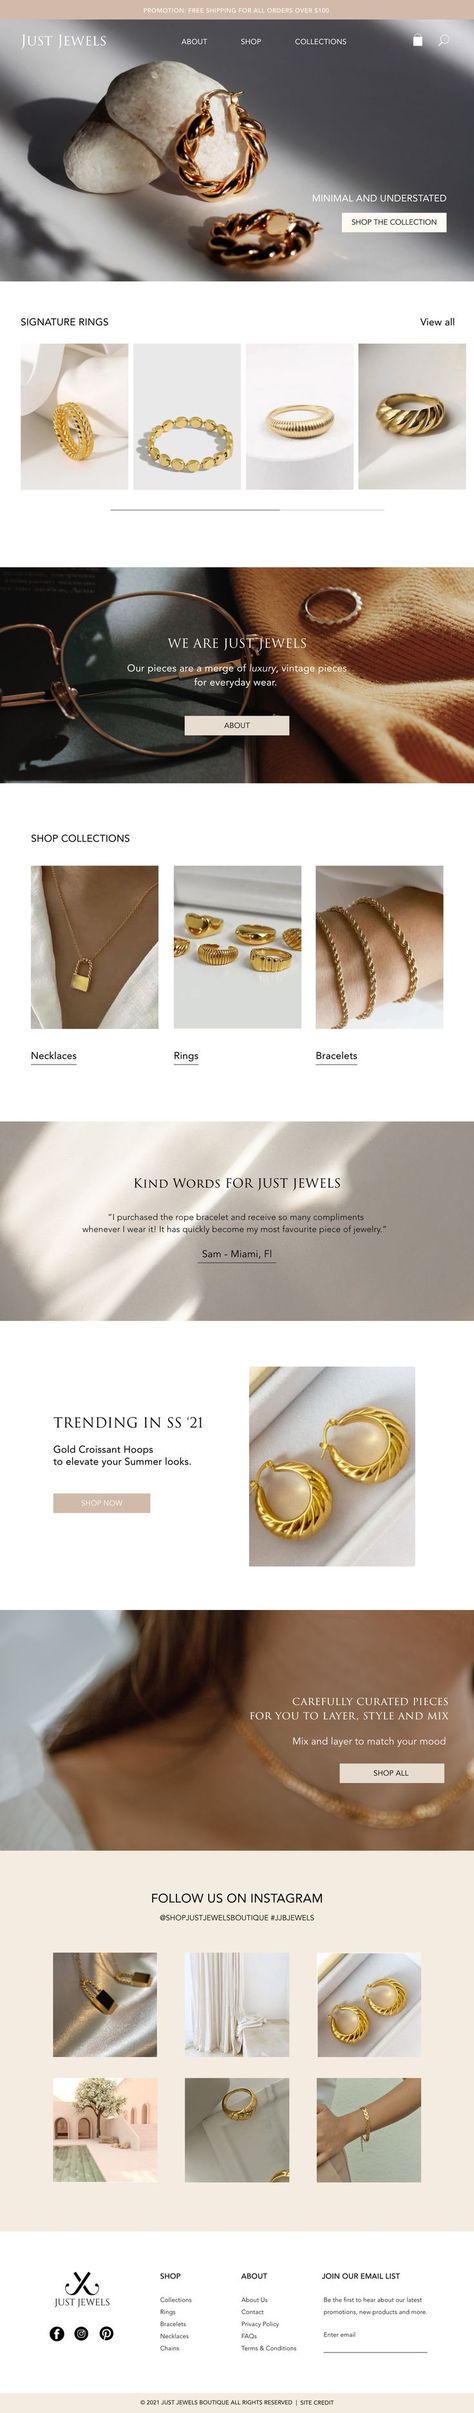 Our contemporary and clean Shopify website design and development for jewelry brand Just Jewels. All the designs were created to showcase their stunning jewelry and visually communicate how the pieces can be mixed, layered and styled by the modern woman. #jewelrywebsitedesign #jewelrybrand #jewelryshopifywebsite #shopifywebsite Website Layout, Design, Bijoux, Web Design, Ideas, Inspirasi, Modern, Jewels, Fotos